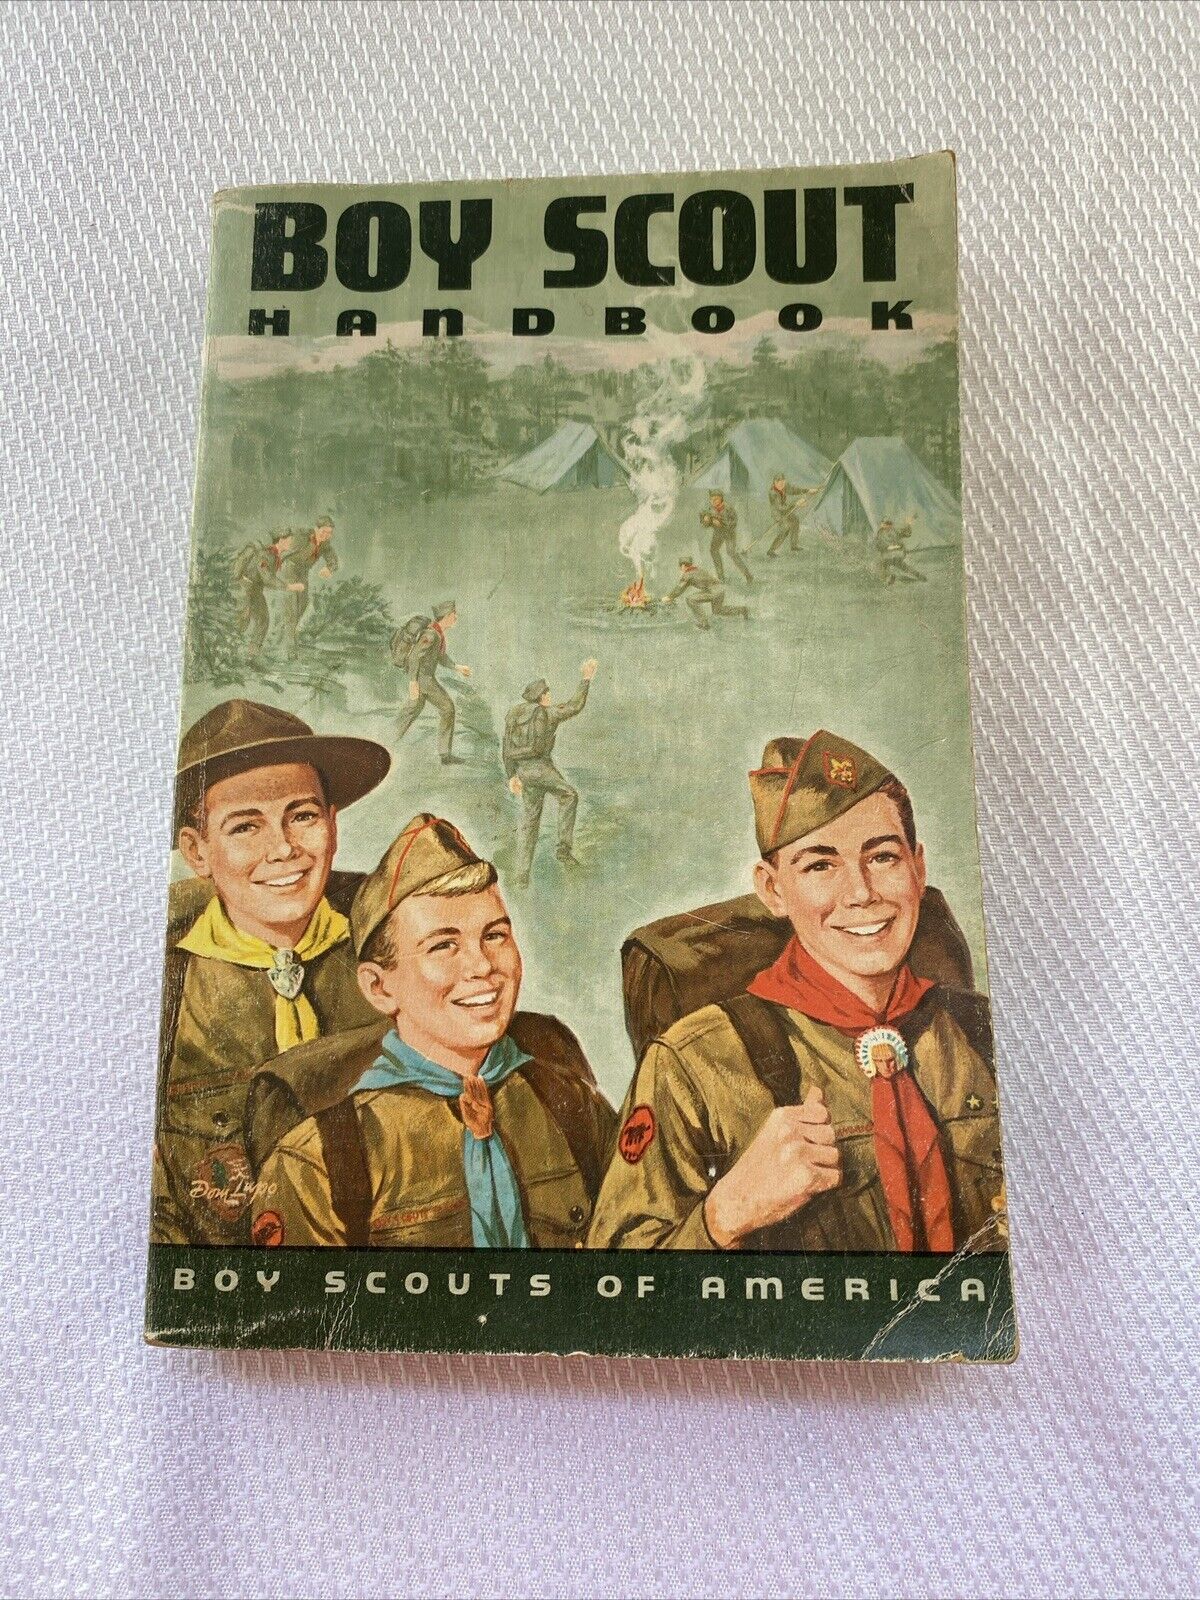 Vintage 1970 Boy Scout Handbook A Boy Scouts of America Book -Water Stained